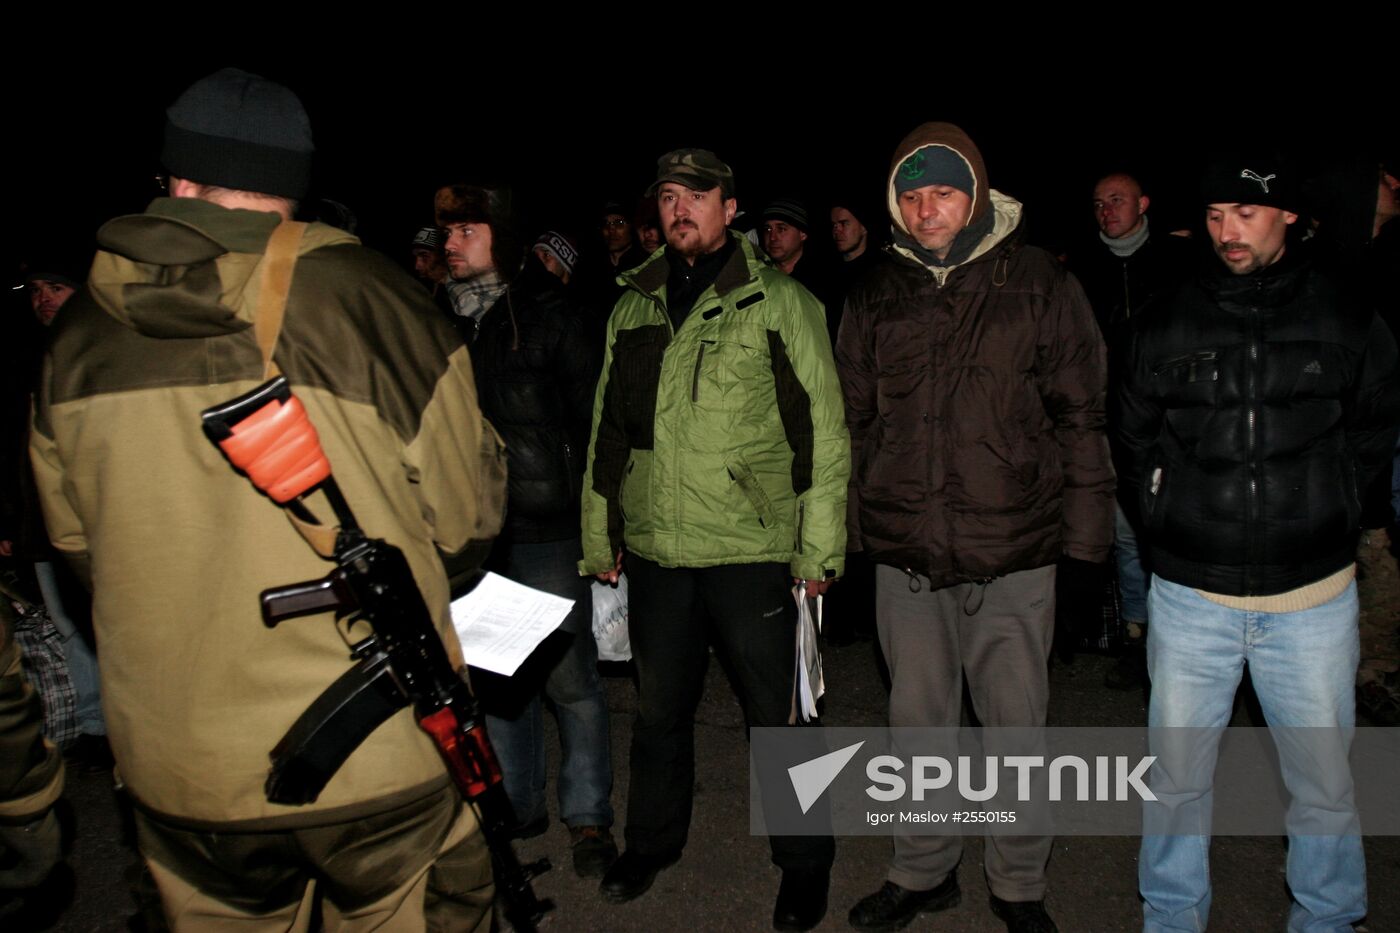 Prisoner exchange between people's militia and special forces in Donetsk suburb